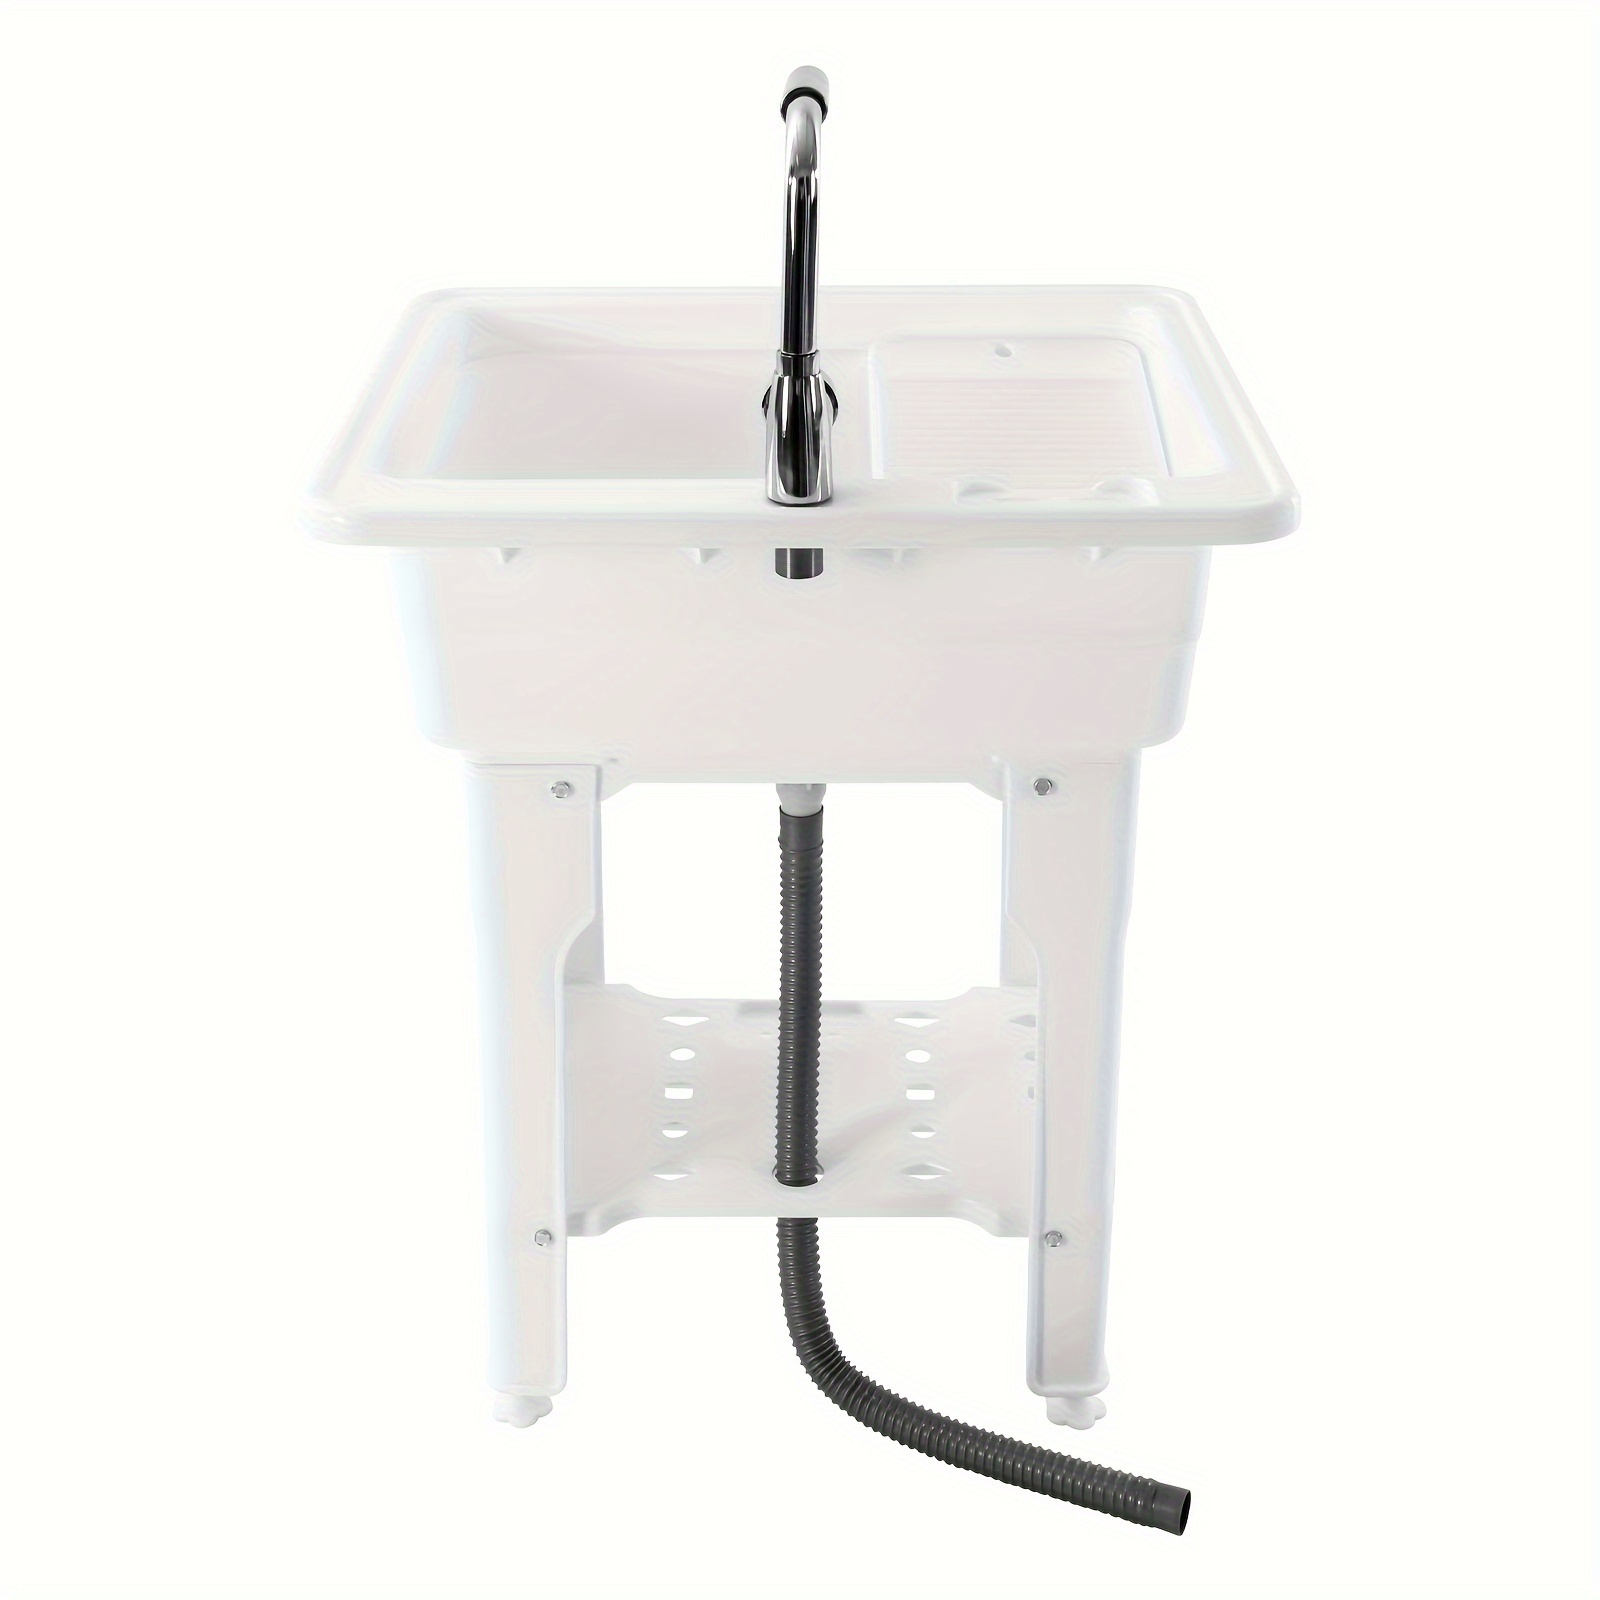 

1pc Laundry Utility Sink, Freestanding Outdoor Washing Tub, Wash Station Sink & Faucet